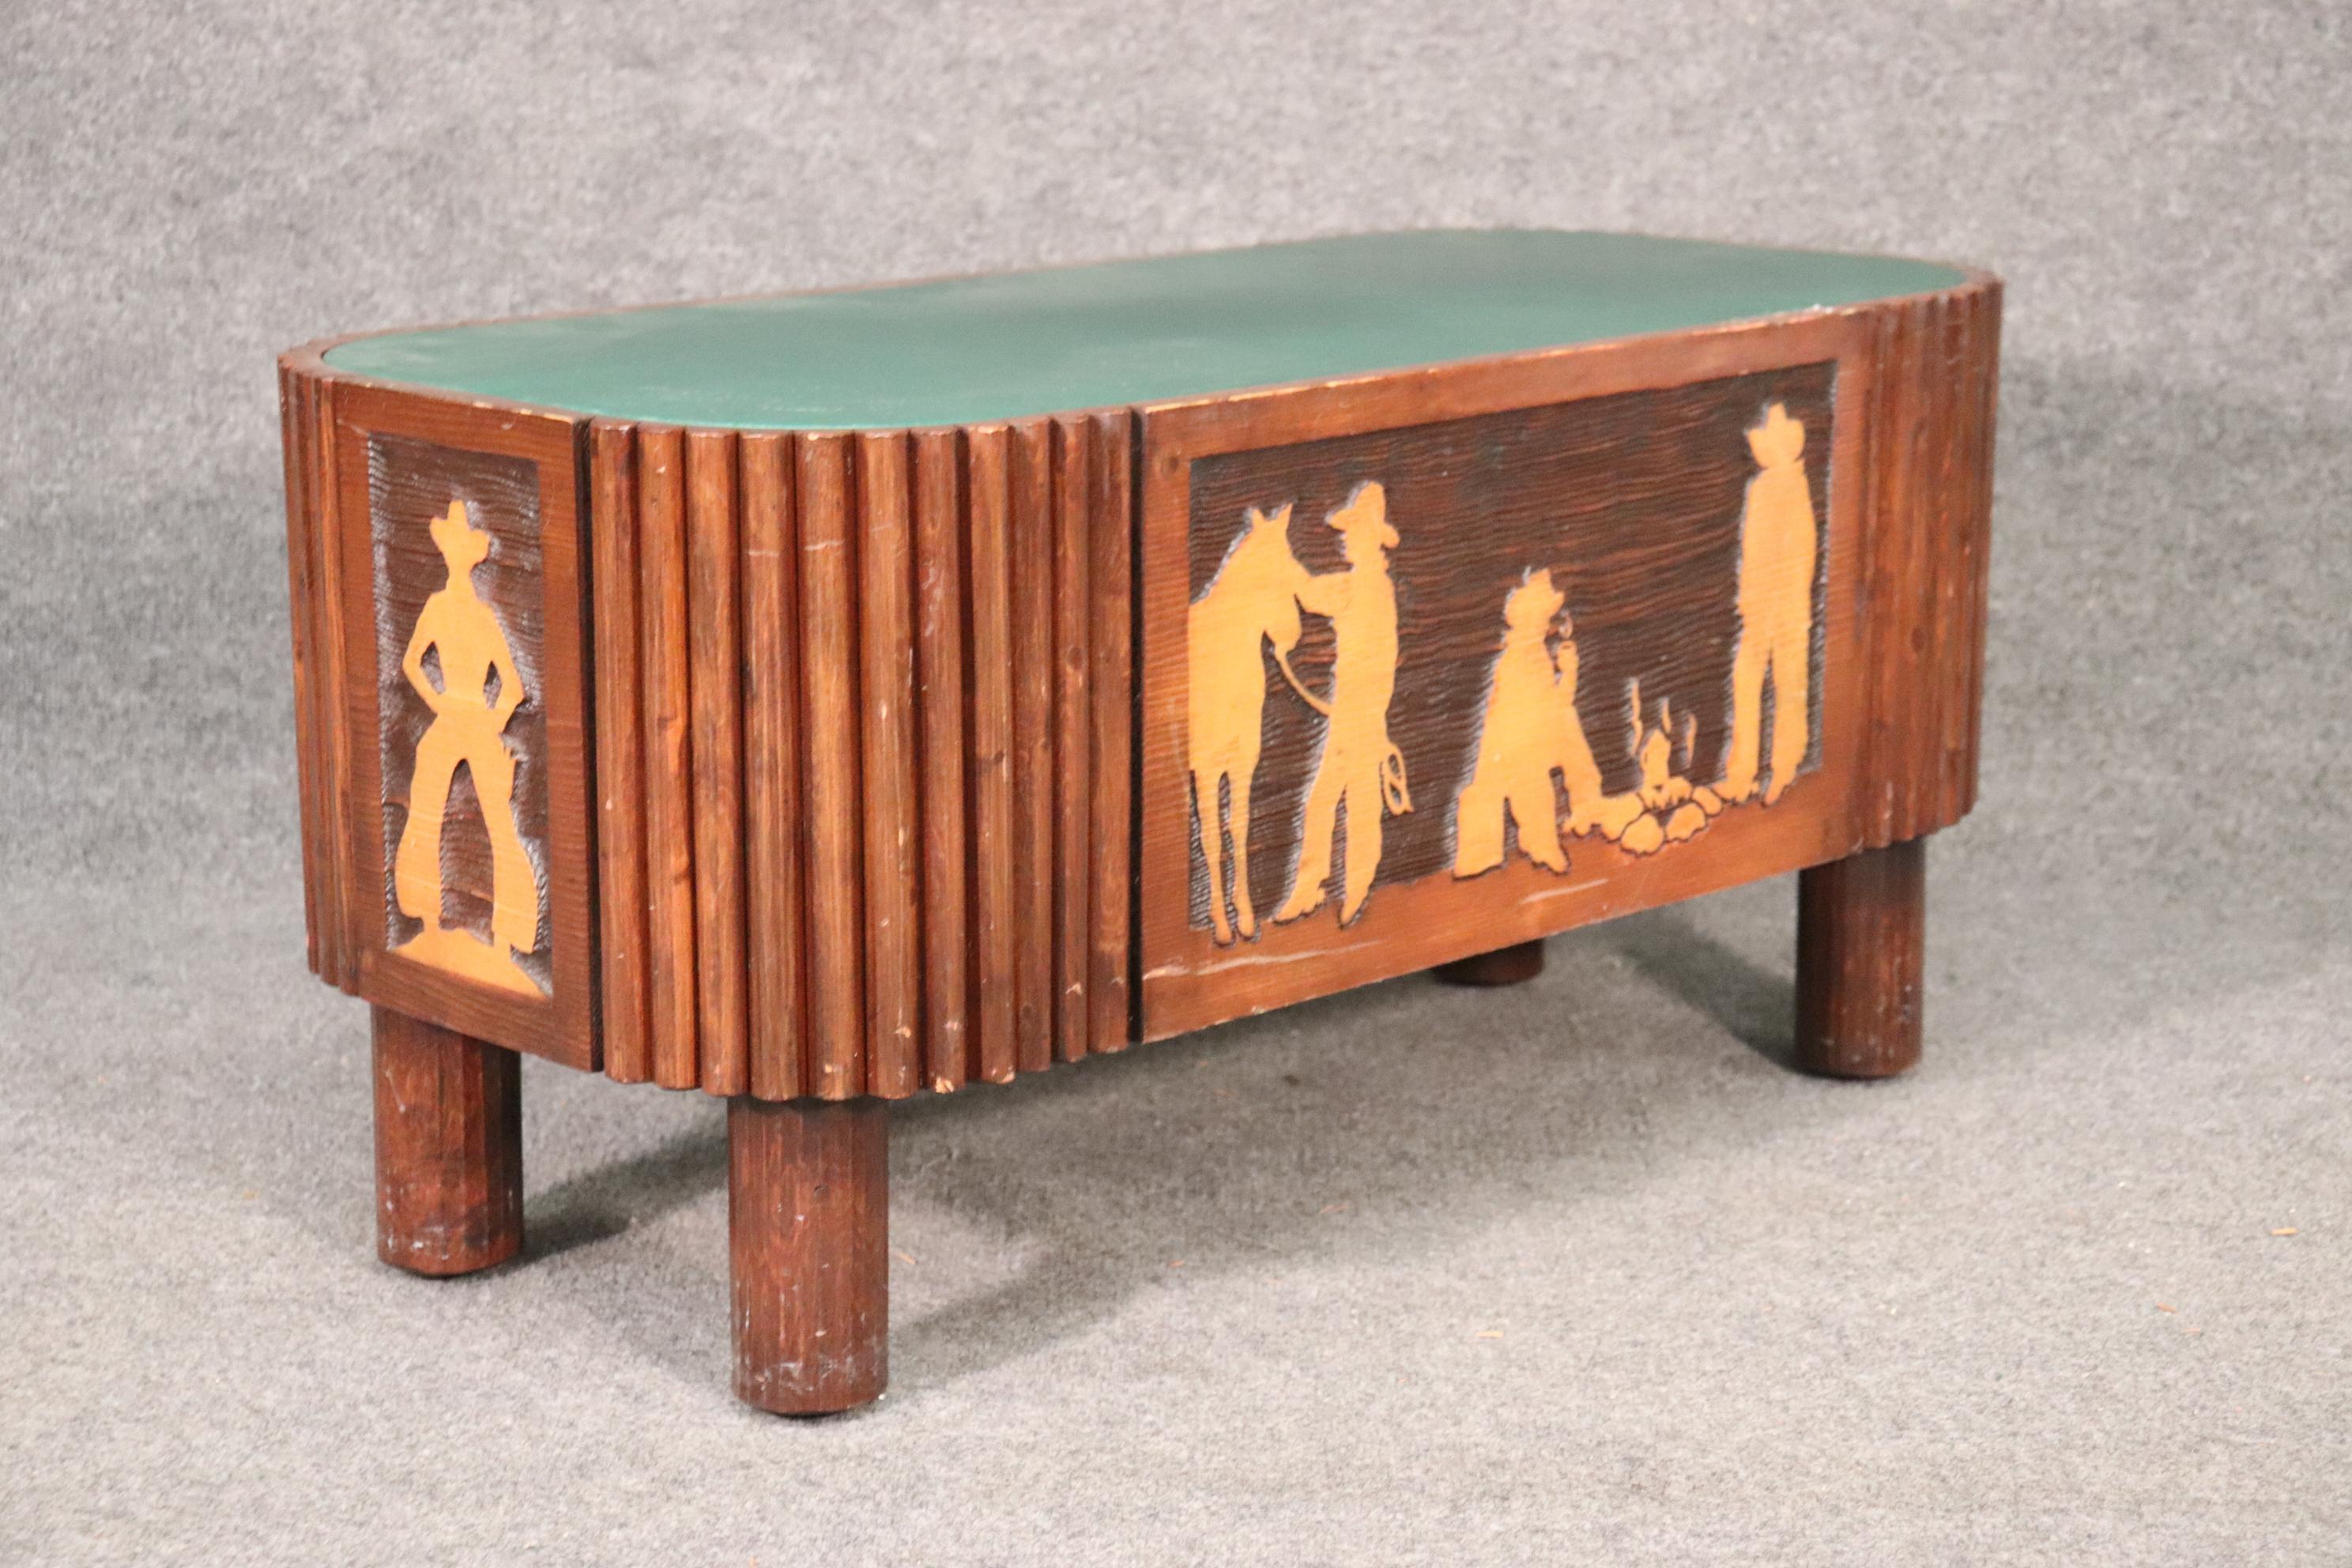 This is a wonderful carved coffee table with three cowboys at a fire with their horse. The table is still being made. The table is in very good condition. The table measures 38 wide x 18 inches tall x 18 inches deep.